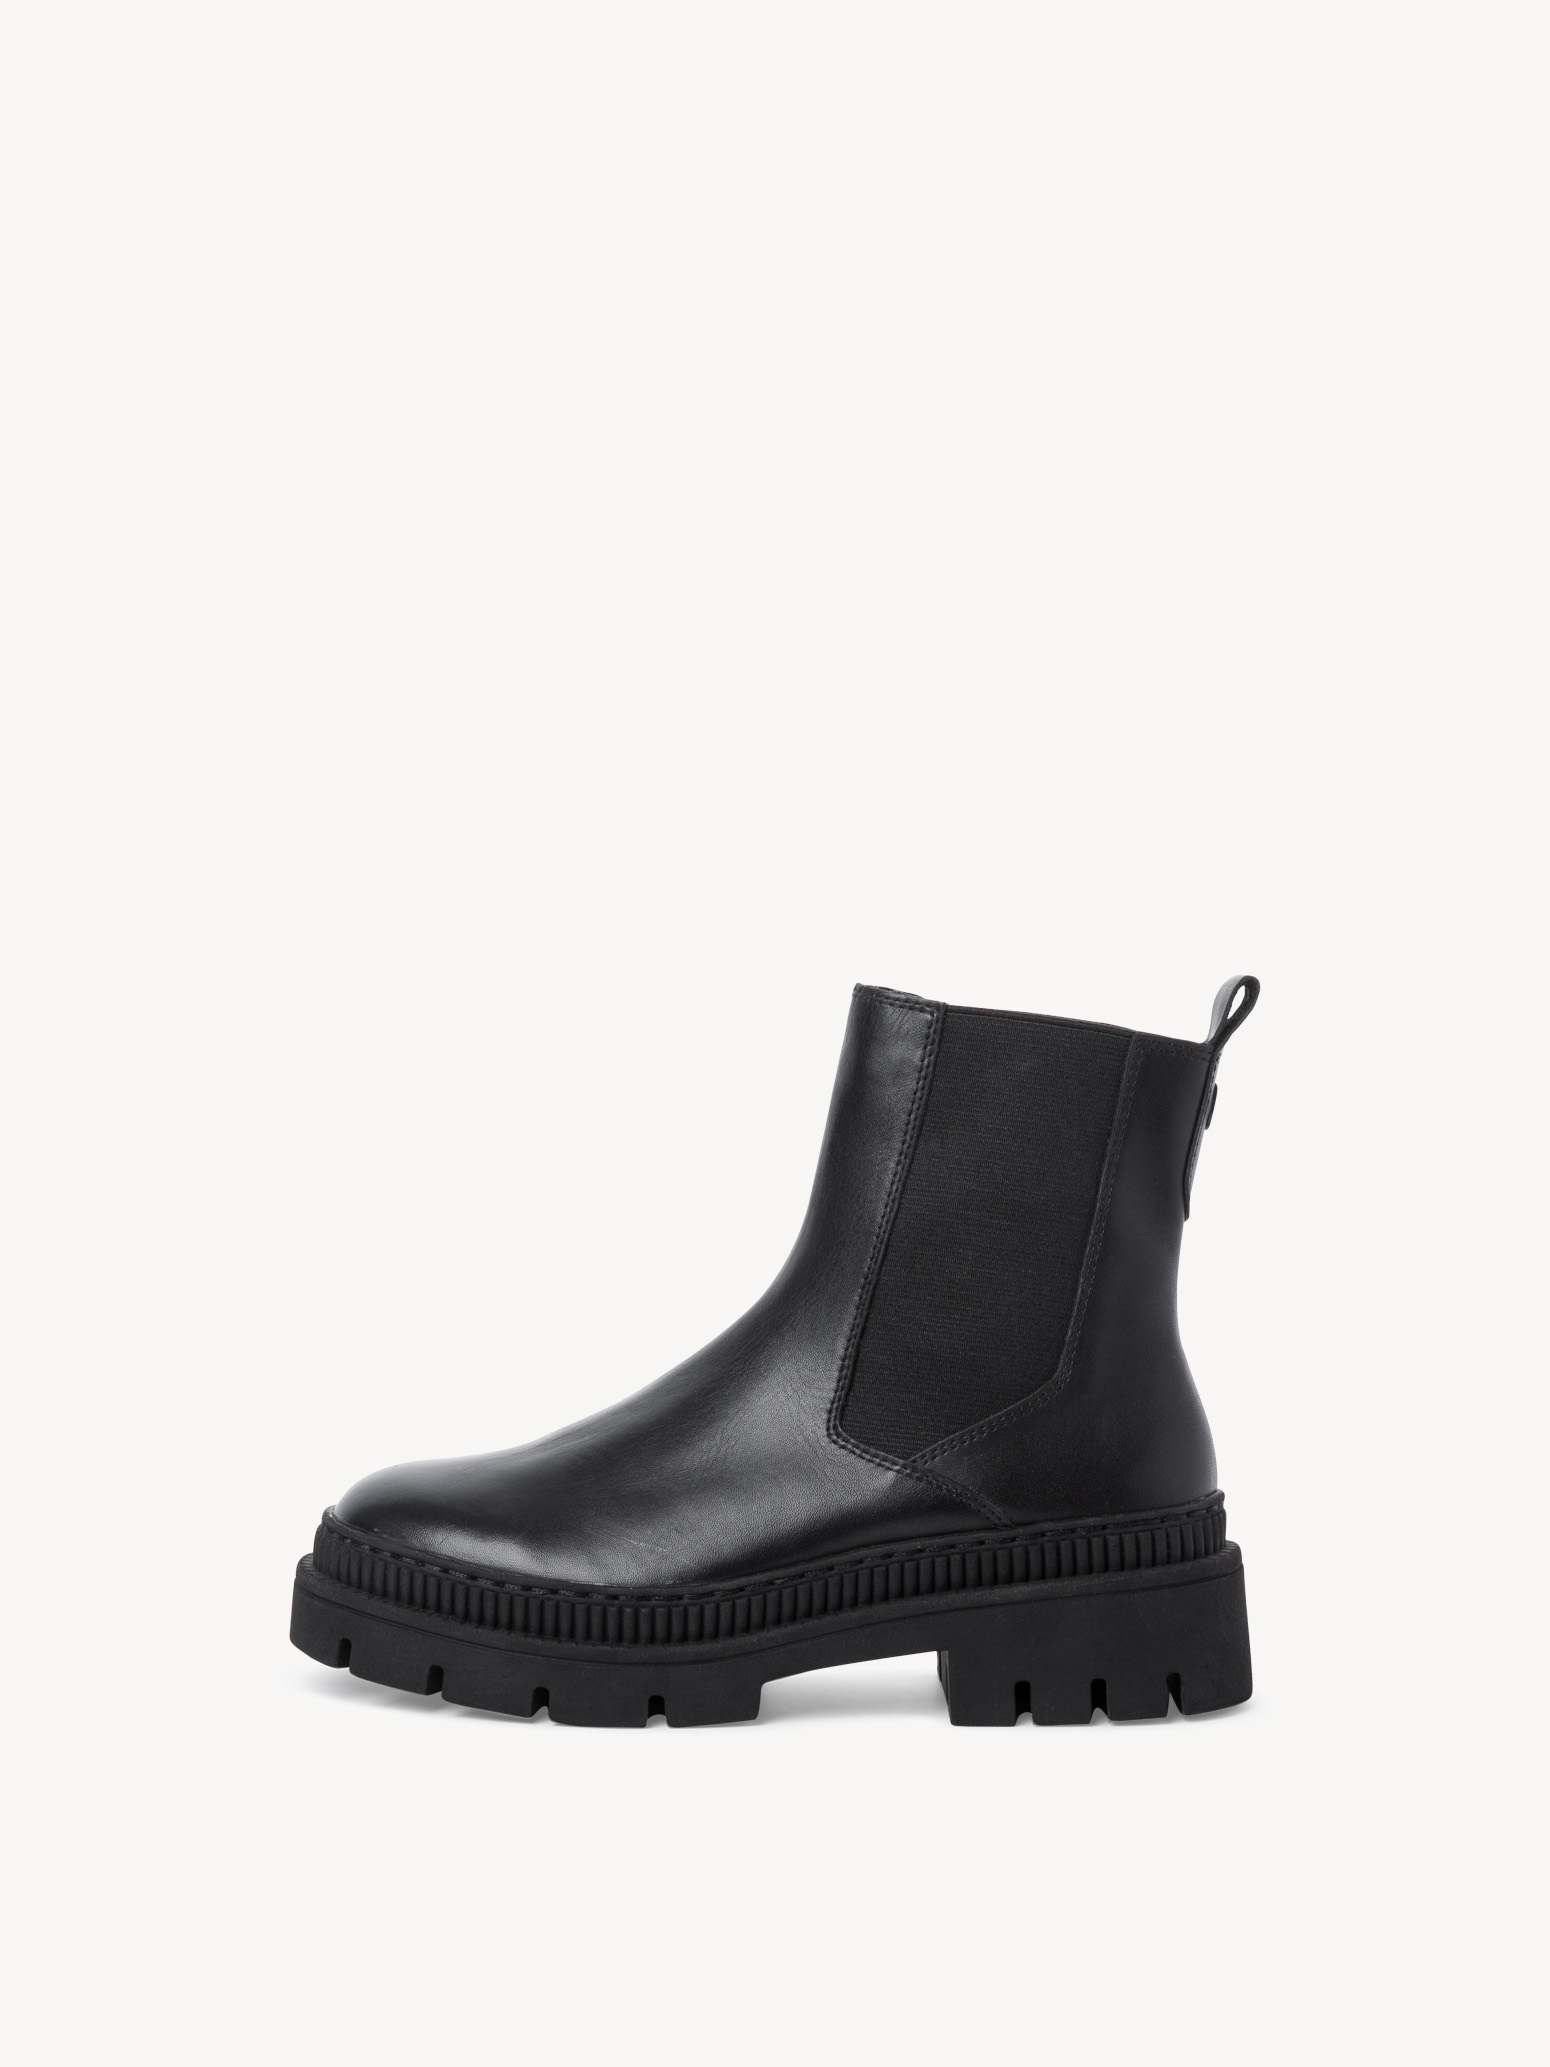 Chelsea boot warm lining